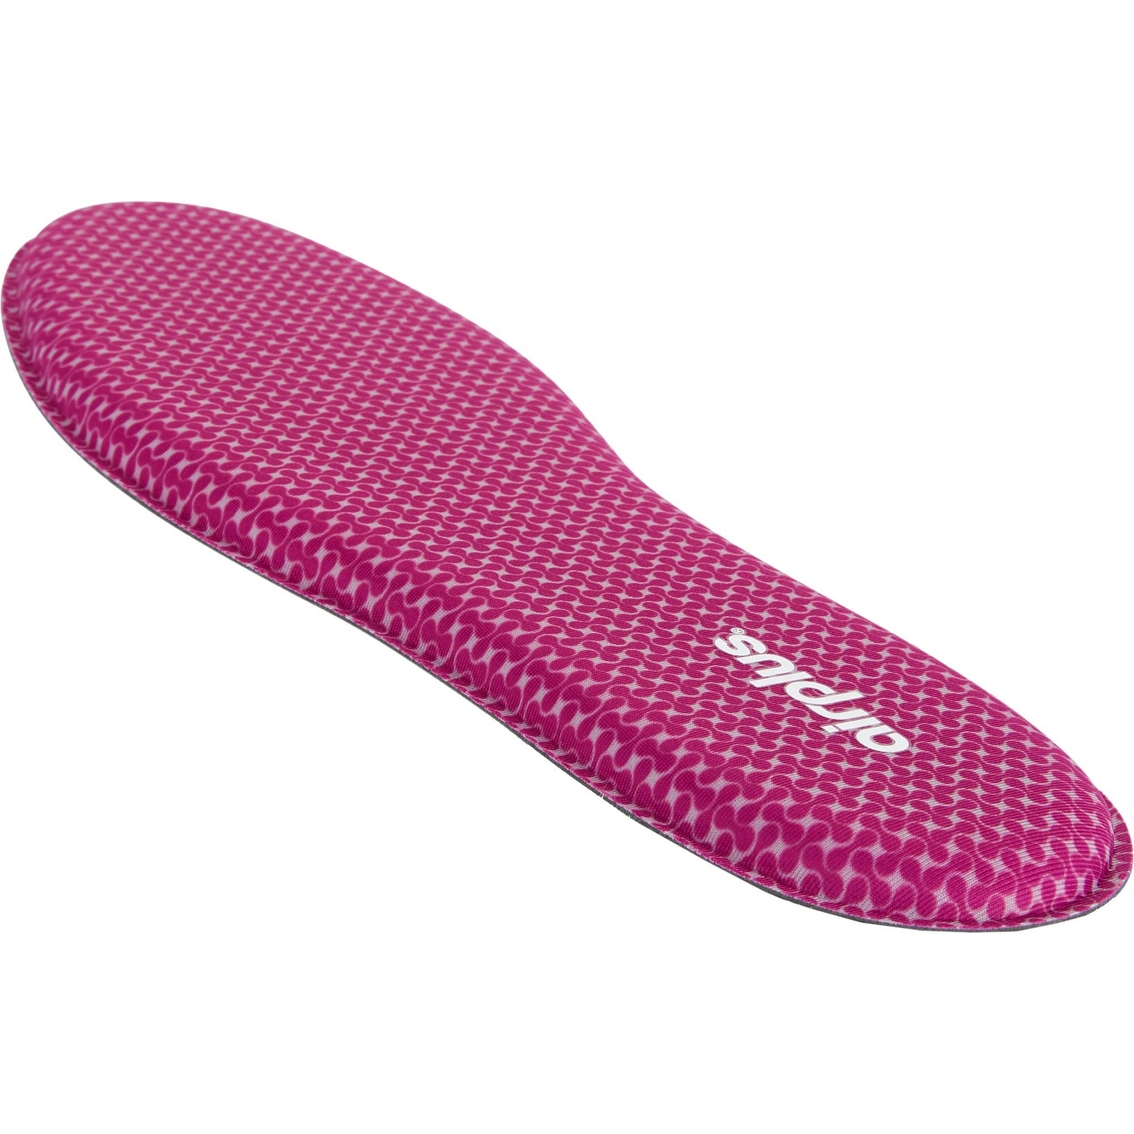 Airplus Women's Memory Comfort Shoe Insoles for Pressure Relief, Size 7 to 13 - Image 6 of 7